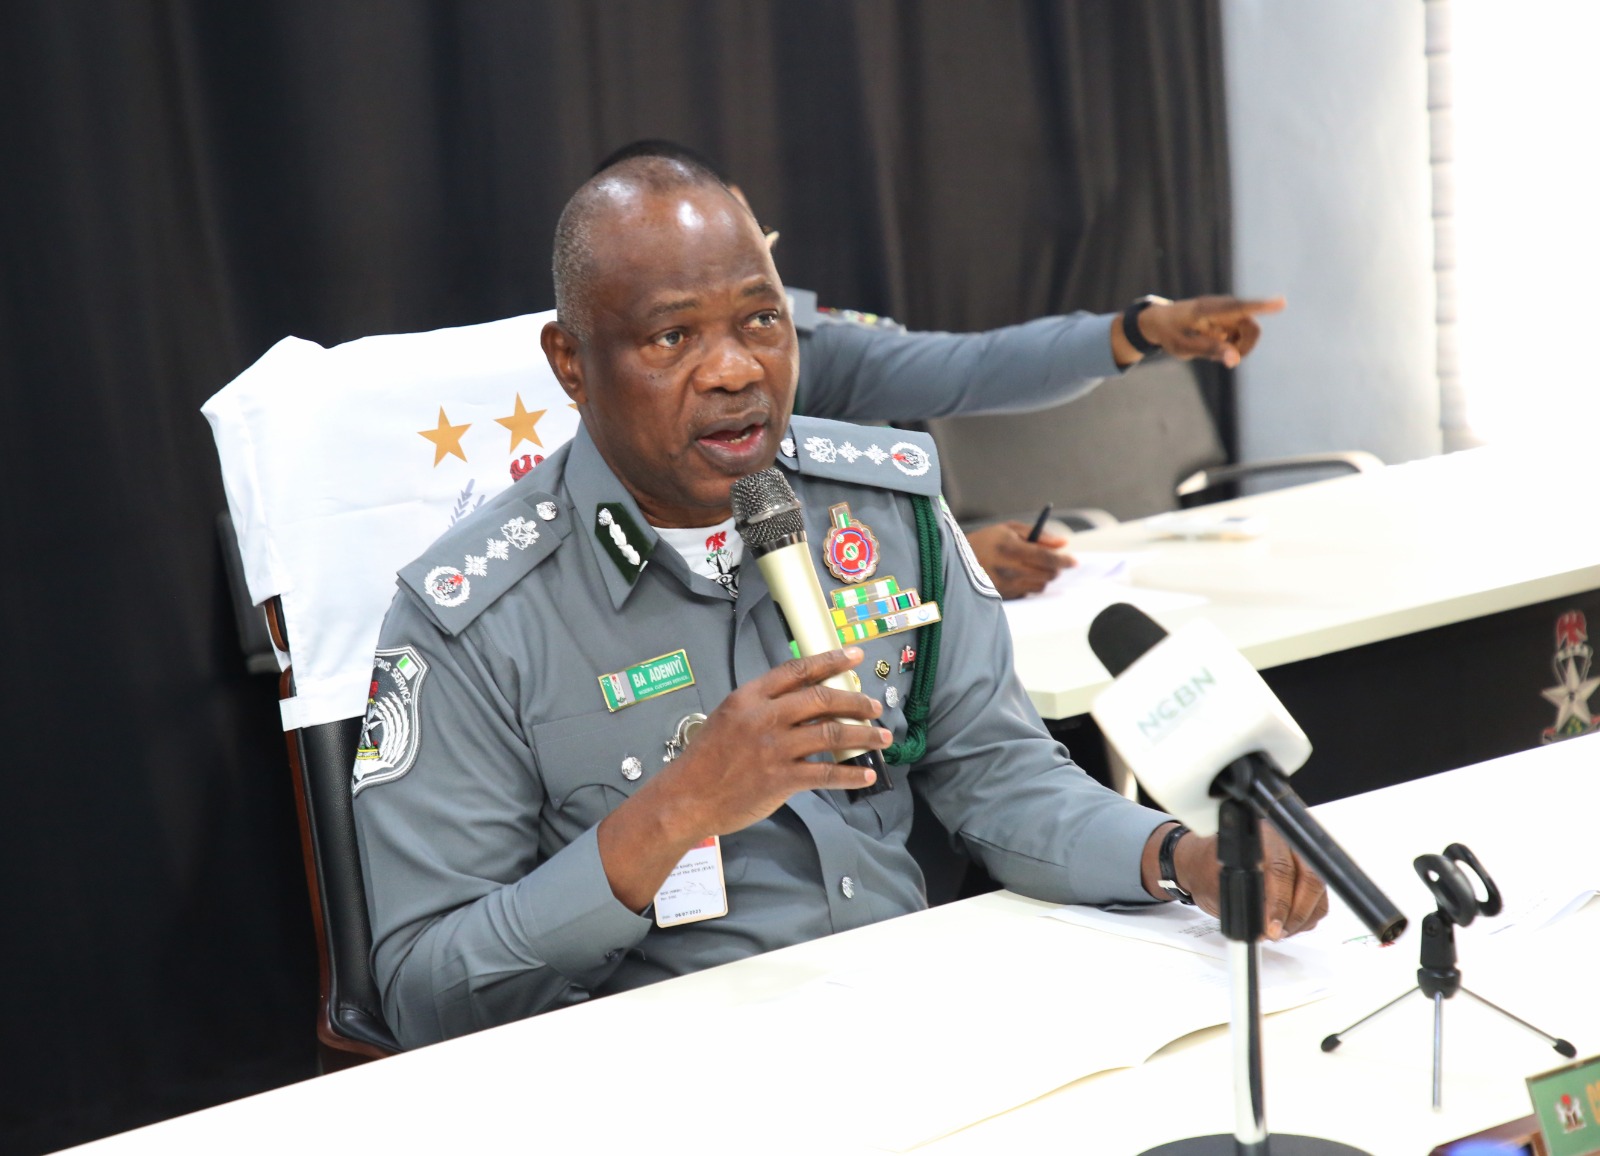 CUSTOMS TO GENEARATE N5.079 TRILLION THIS YEAR—CGC